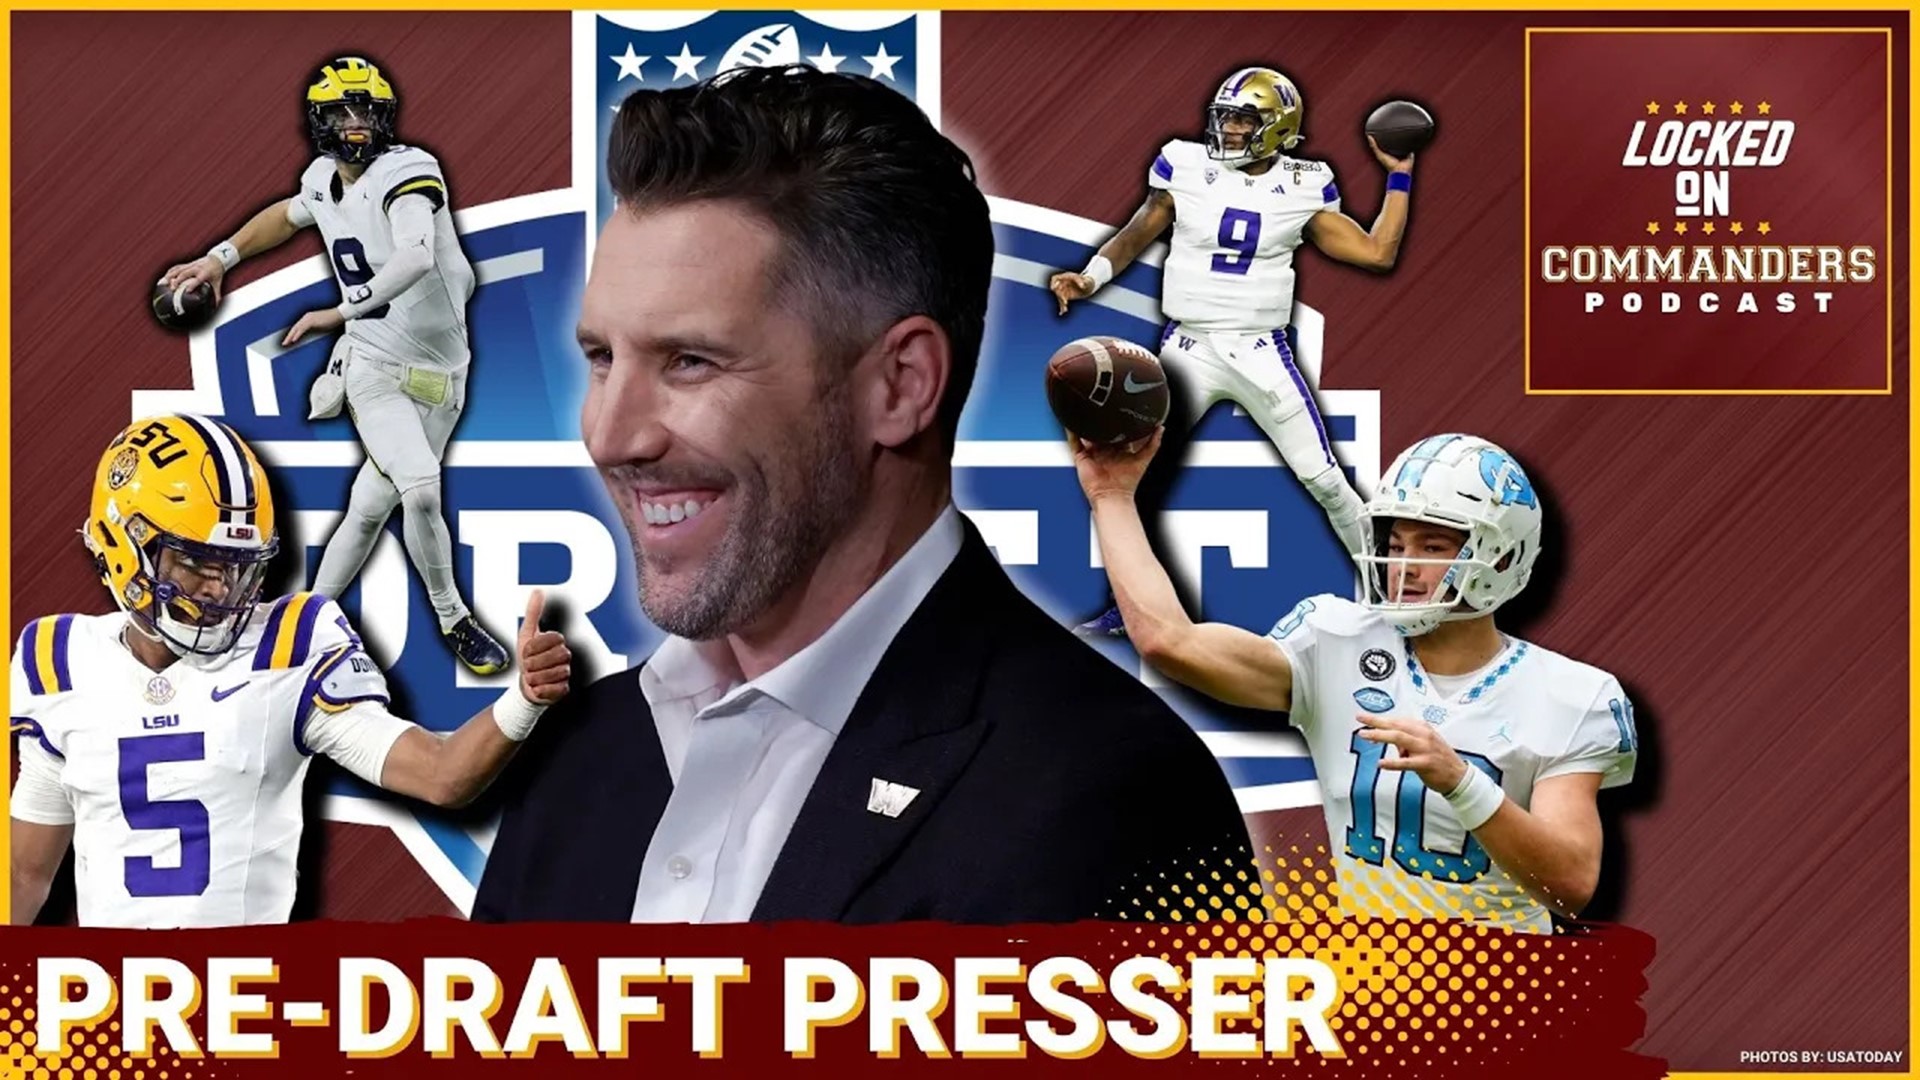 Washington Commanders general manager Adam Peters and assistant general manager Lance Newmark held their pre-NFL Draft press conference on Thursday.